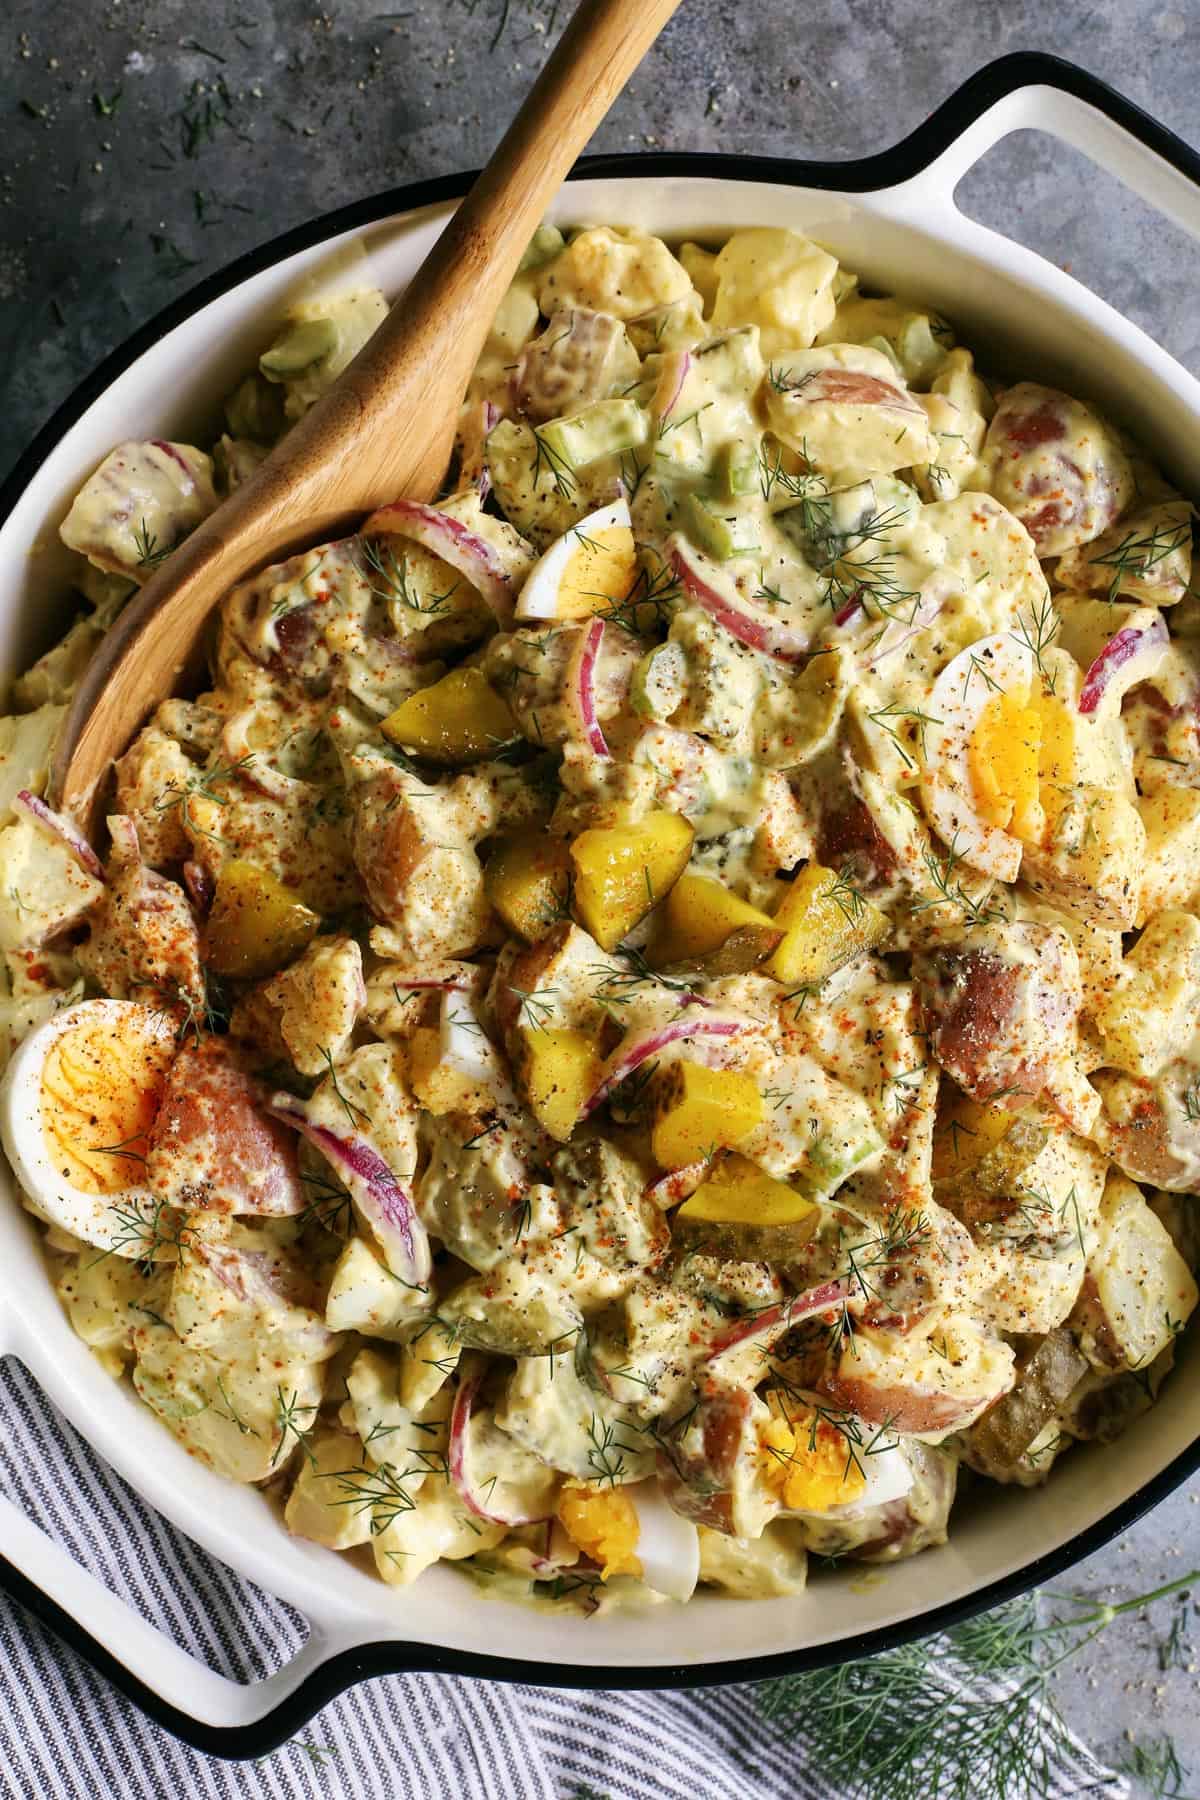 Dill pickle potato salad with hard boiled eggs in a bowl.